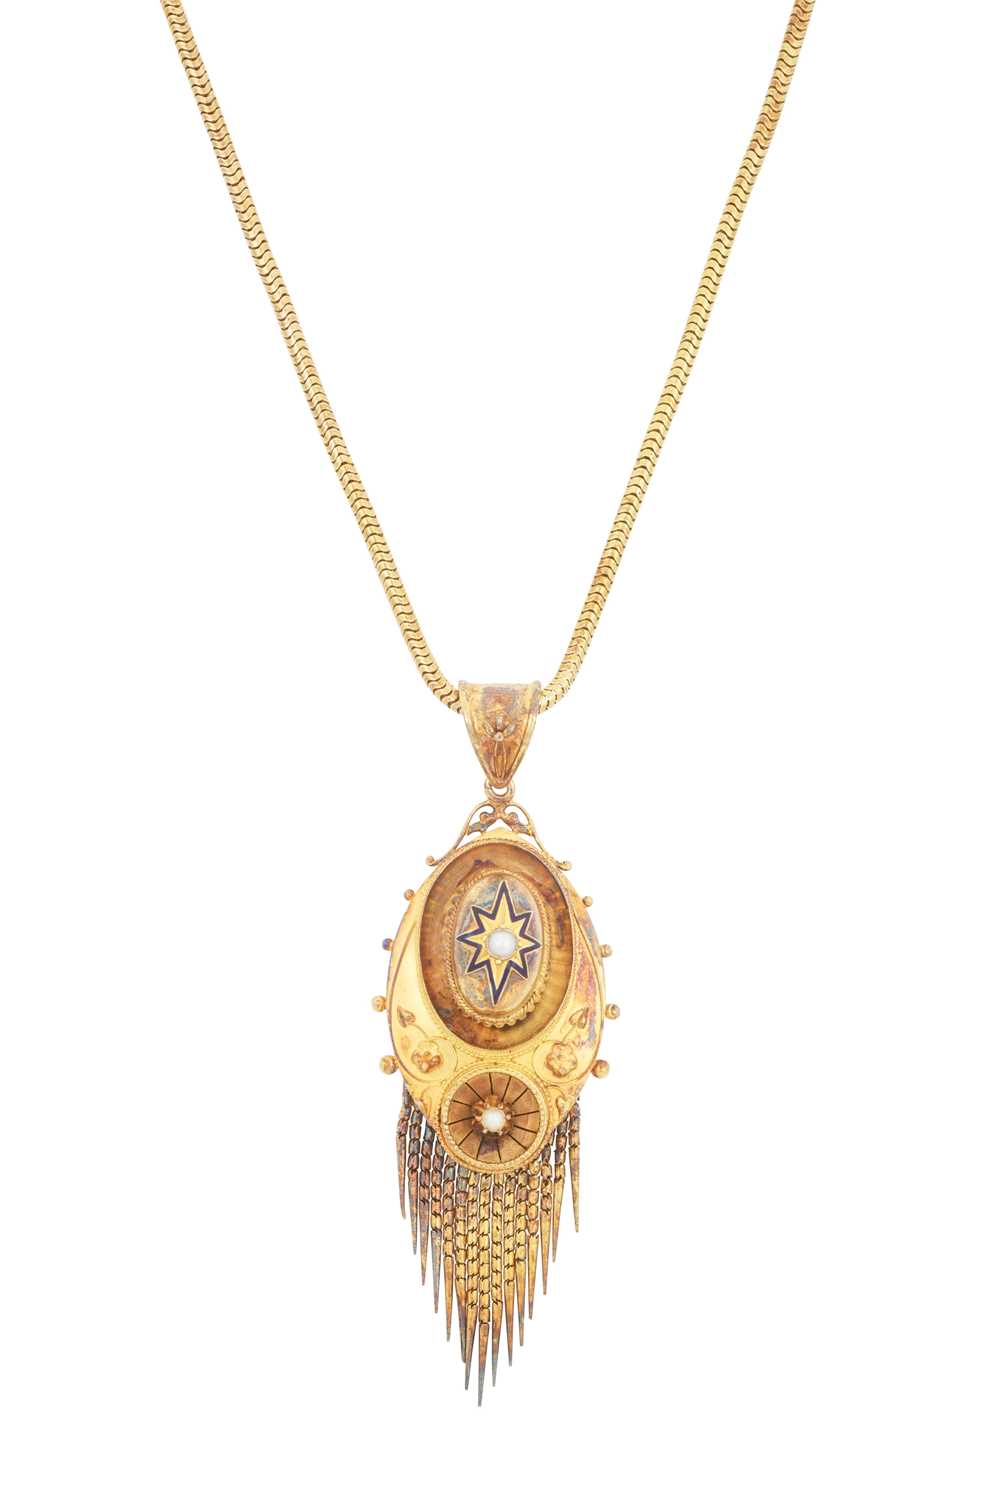 A Victorian Enamel and Split Pearl Pendant/Locket on Chain the oval plaque with a rasied dome